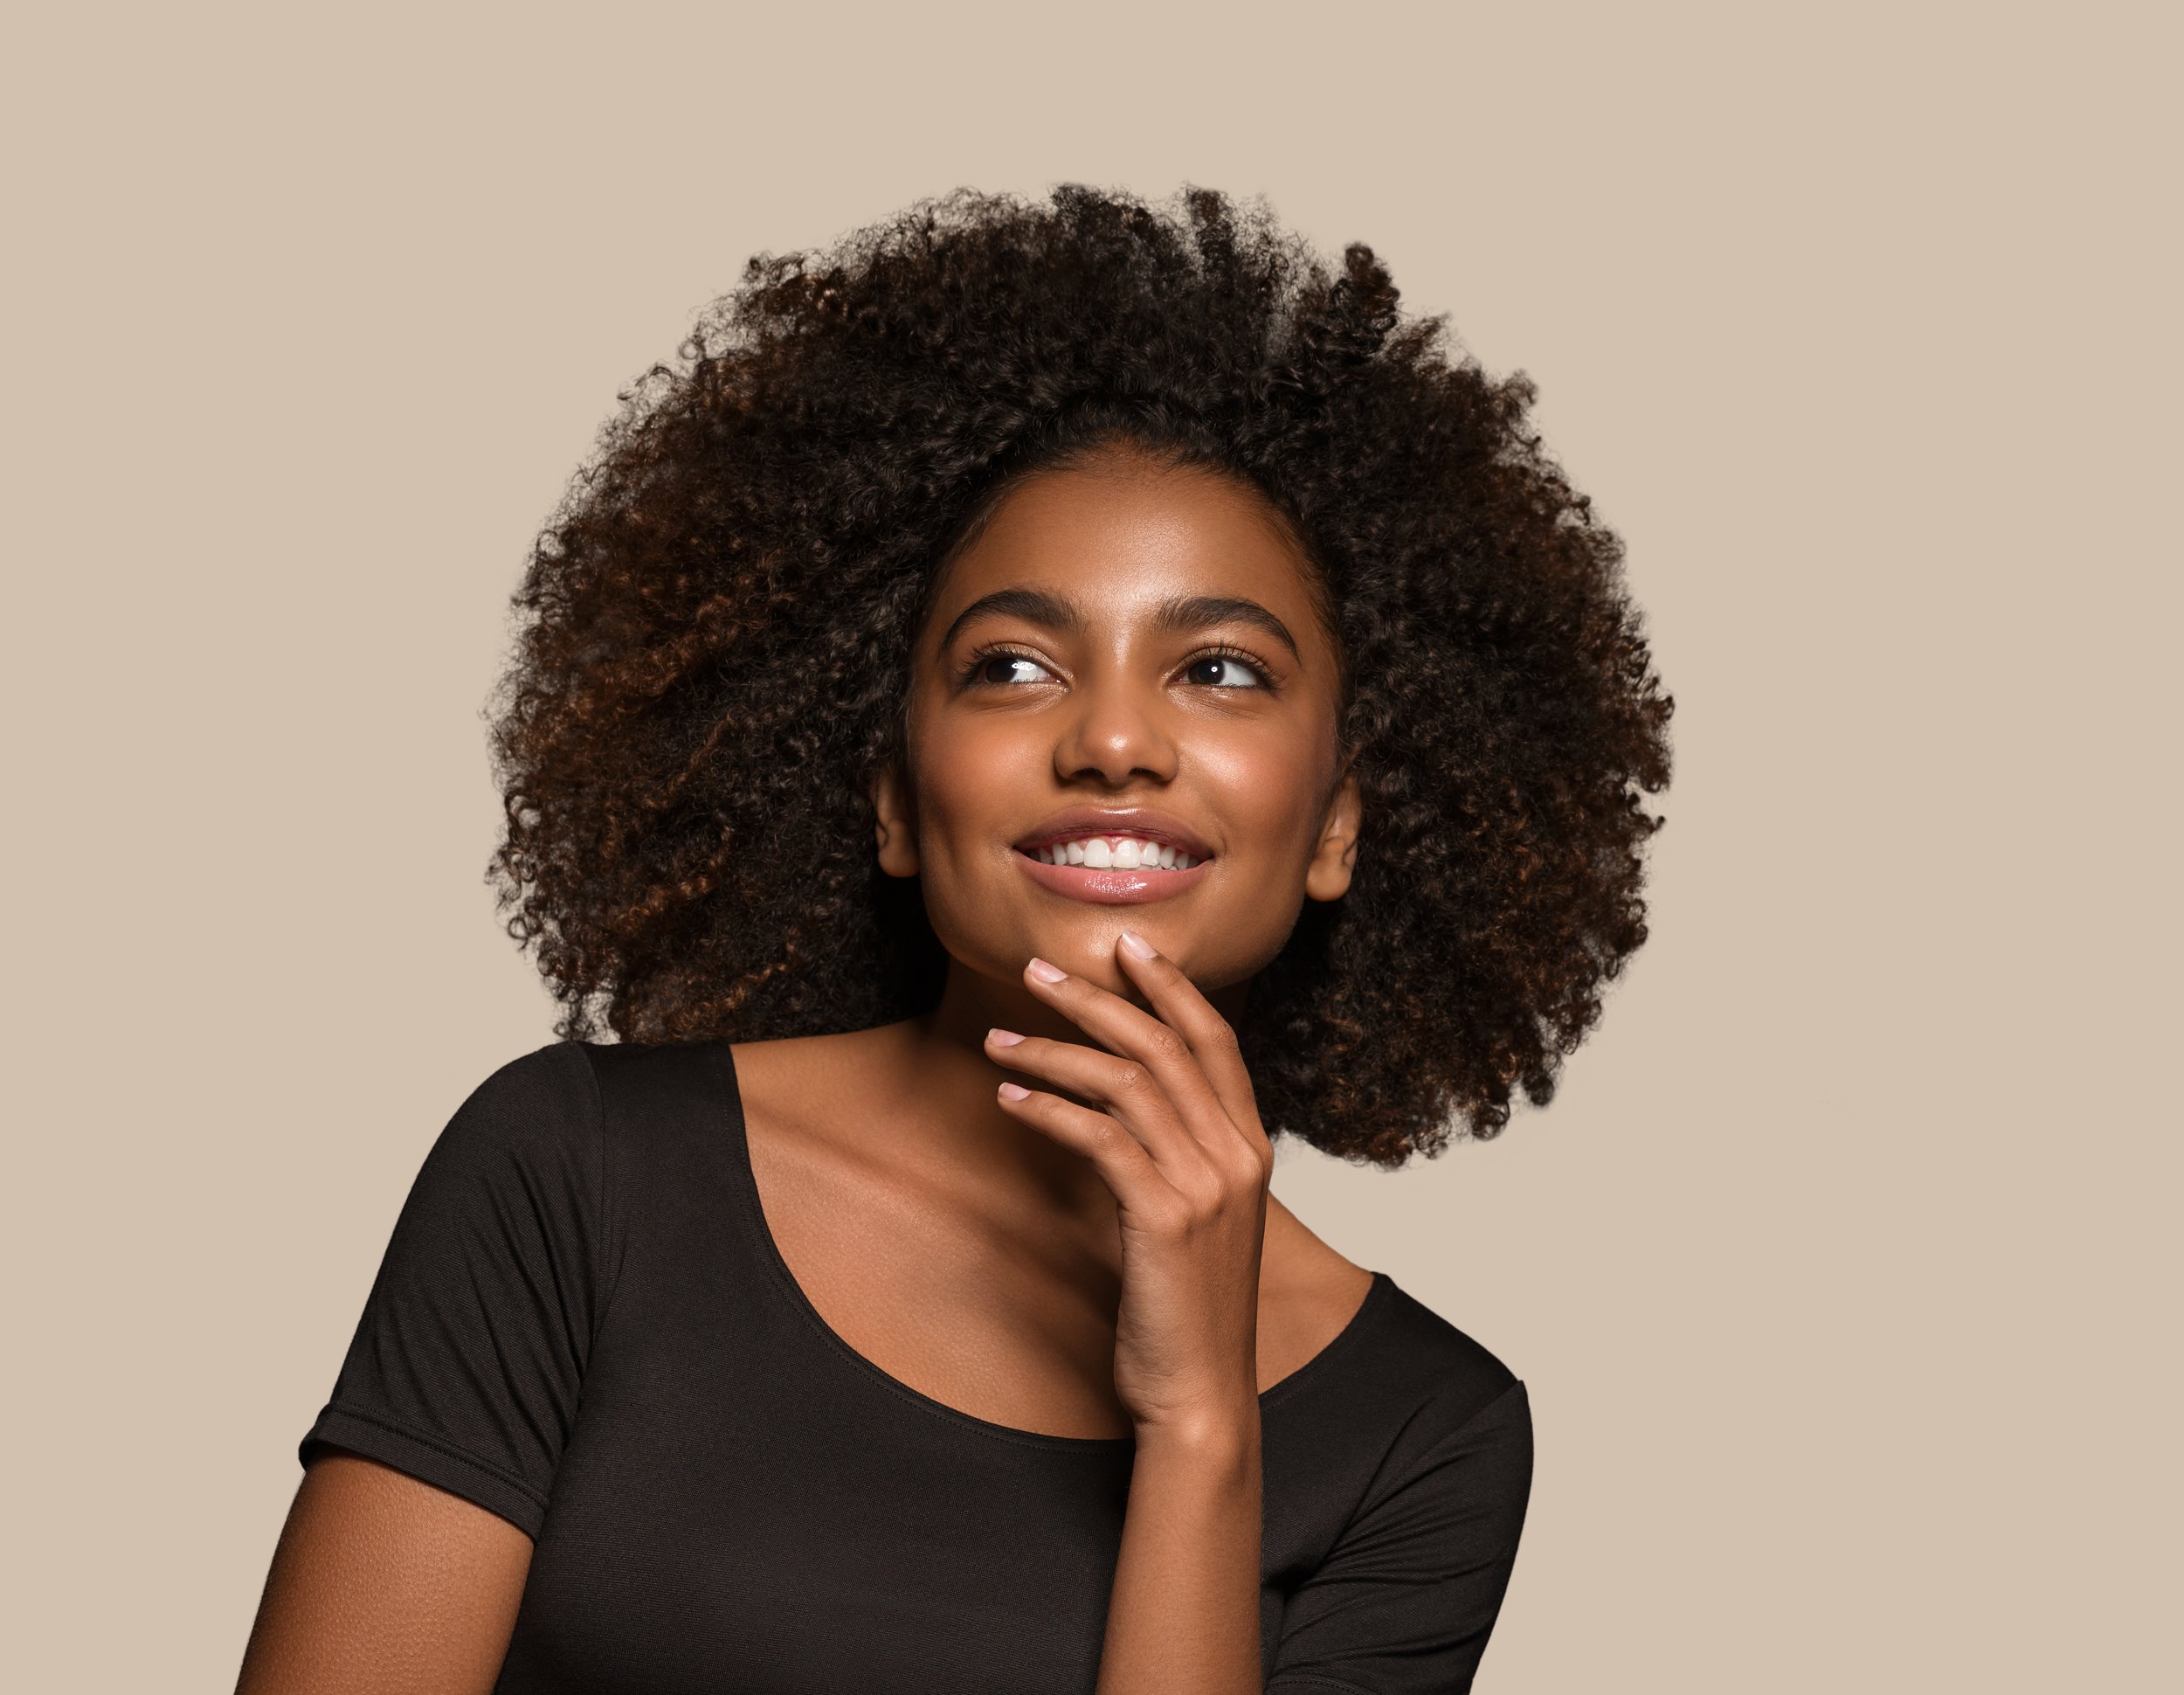 beautiful-african-woman-black-t-shirt-portrait-afro-haircut-touching-her-face-color-background-brown.jpg